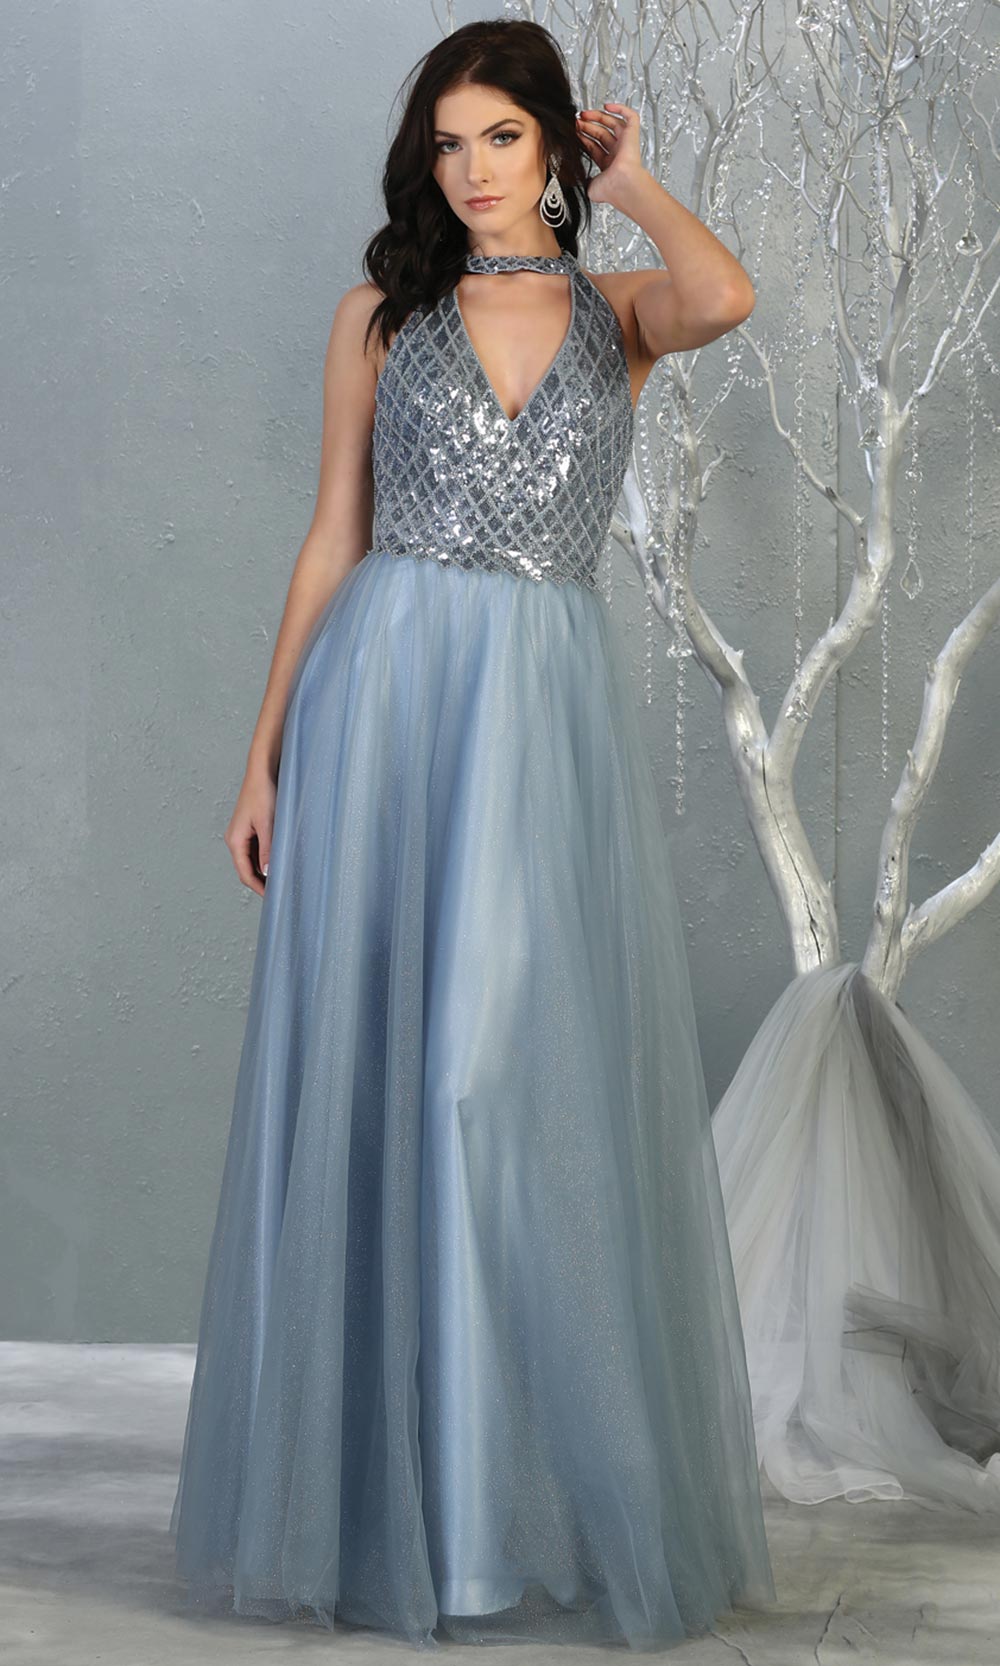 Mayqueen RQ7863 long dusty blue v neck sequin top evening gown. Full length flowy blue gown w/ tulle skirt is perfect for  enagagement/e-shoot dress, formal wedding guest, evening party dress, prom, engagement, wedding reception. Plus sizes avail.jpg